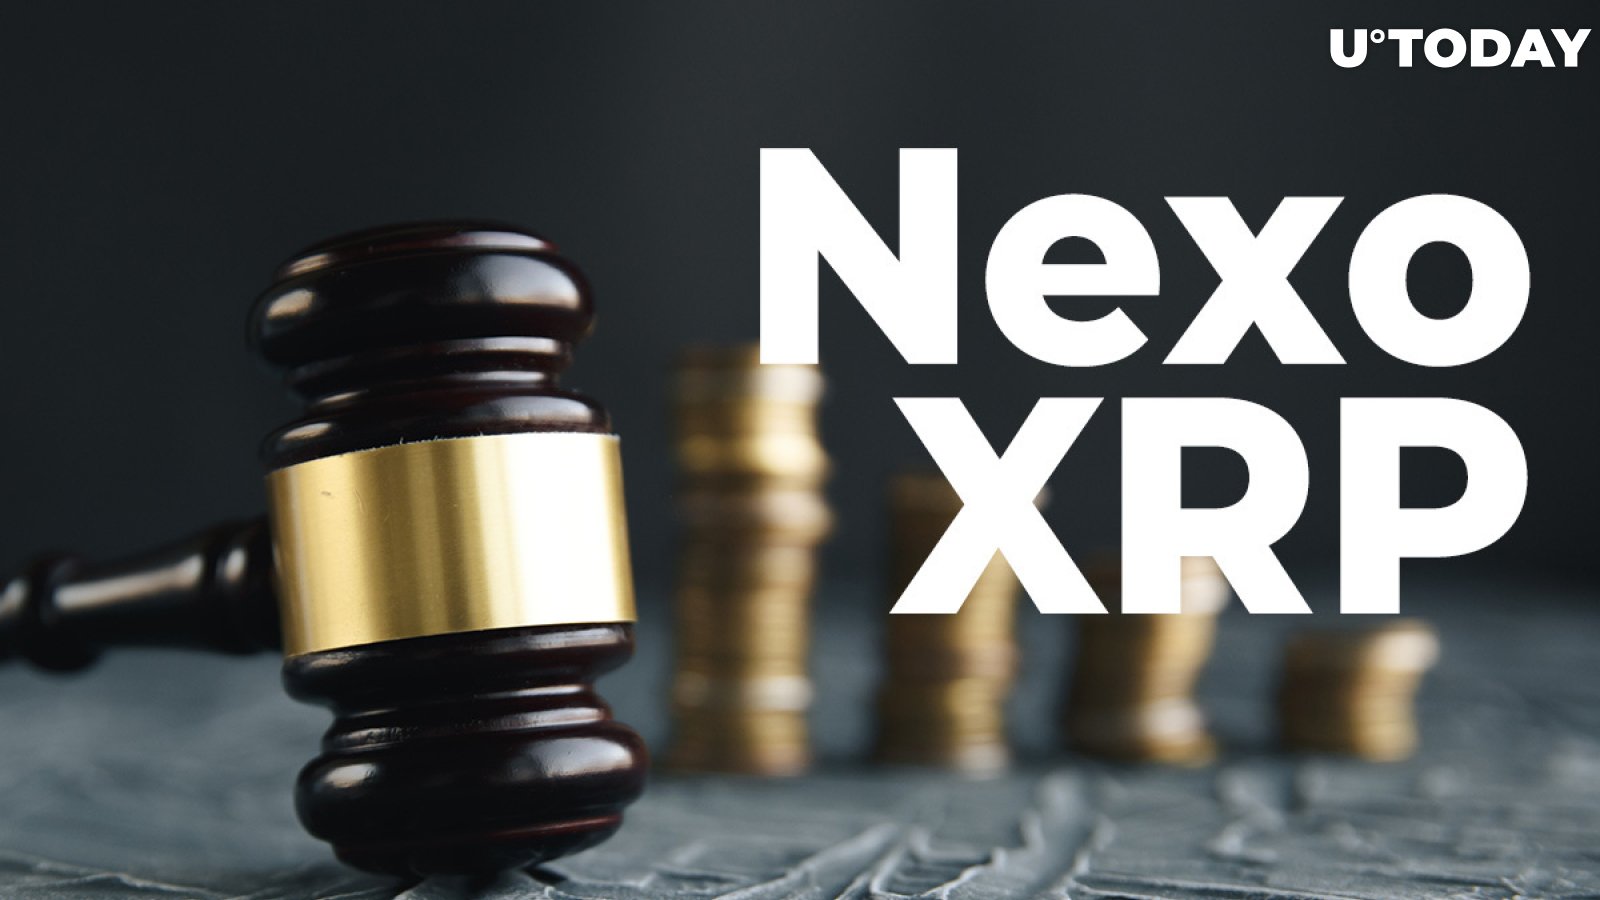 Nexo Sued for "Unlawful" Suspension of XRP Payments